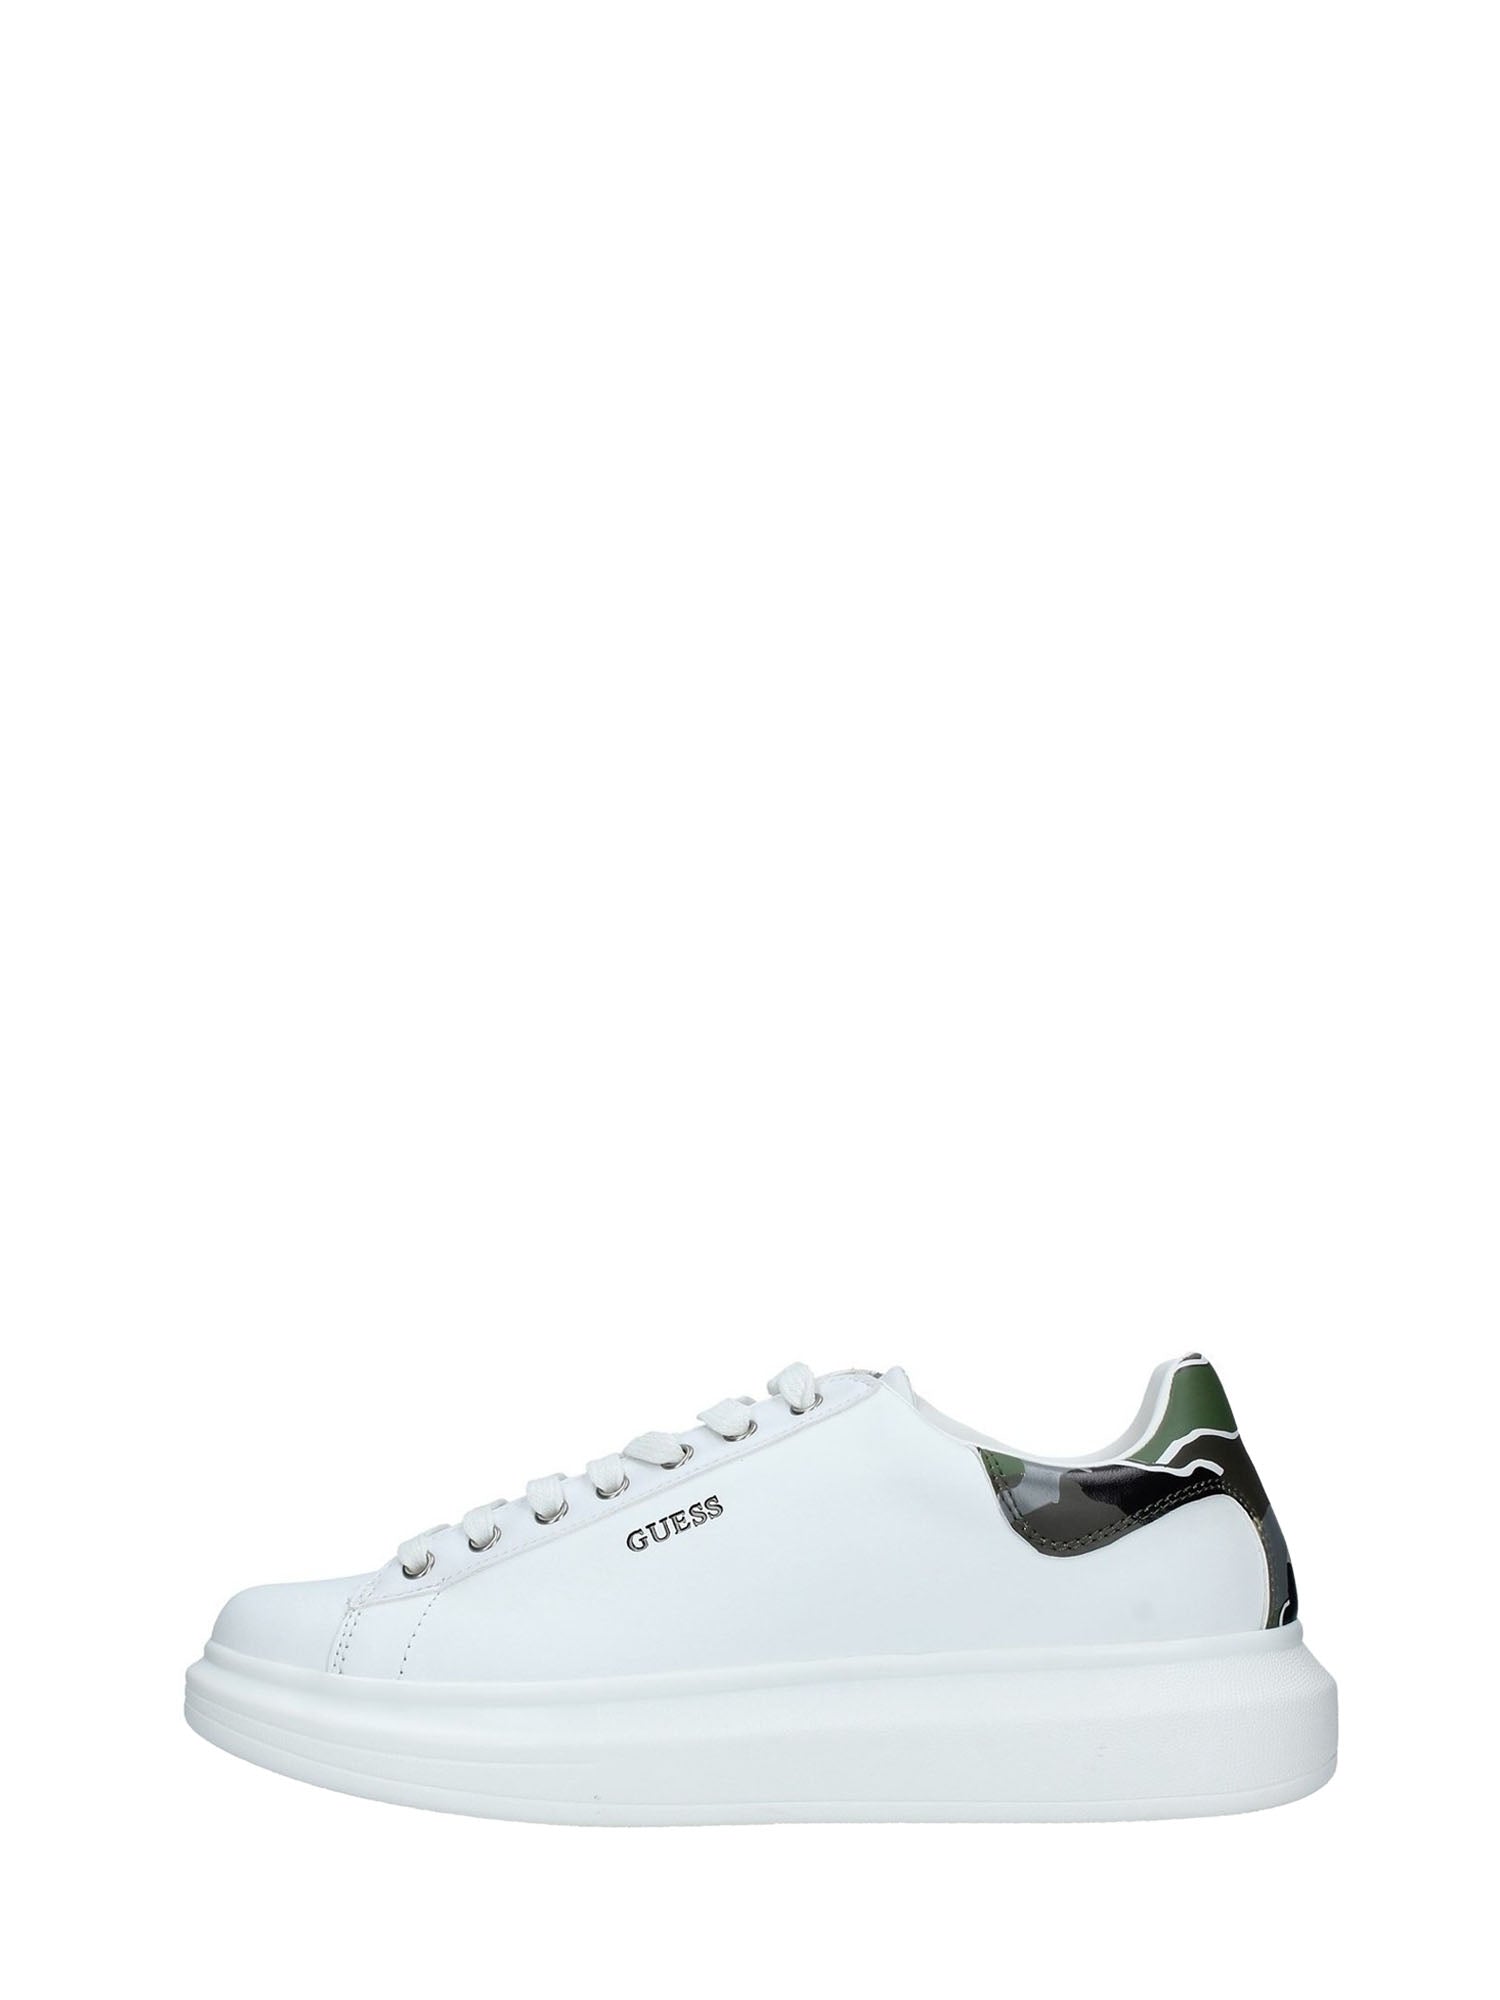 GUESS SNEAKER SALERNO BIANCO - CAMOUFLAGE